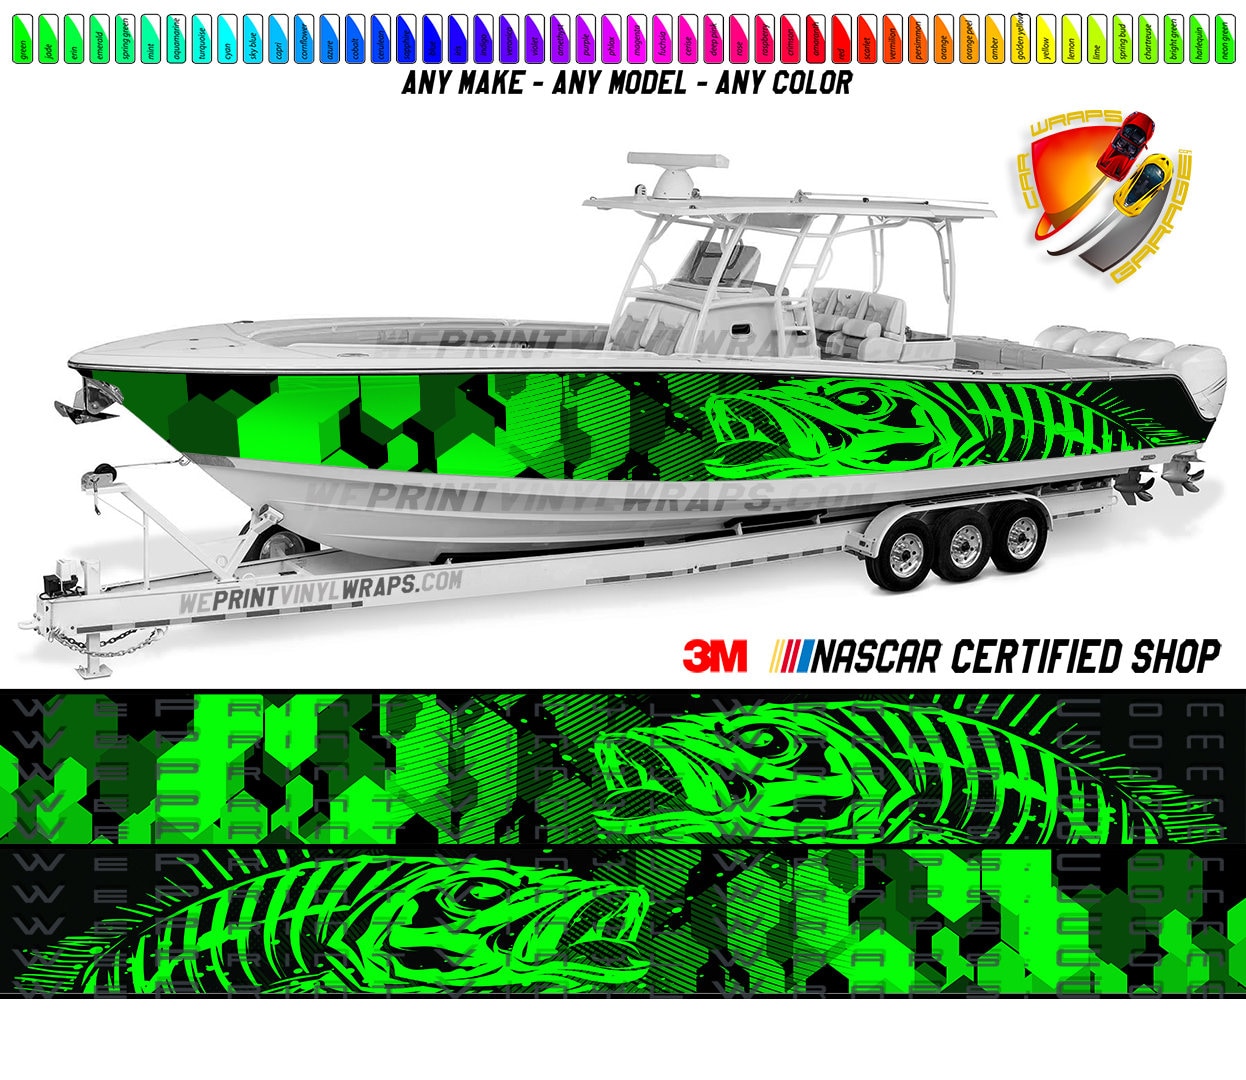 Camo Lime Green Seabass Graphic Boat Vinyl Wrap Decal Fishing Bass